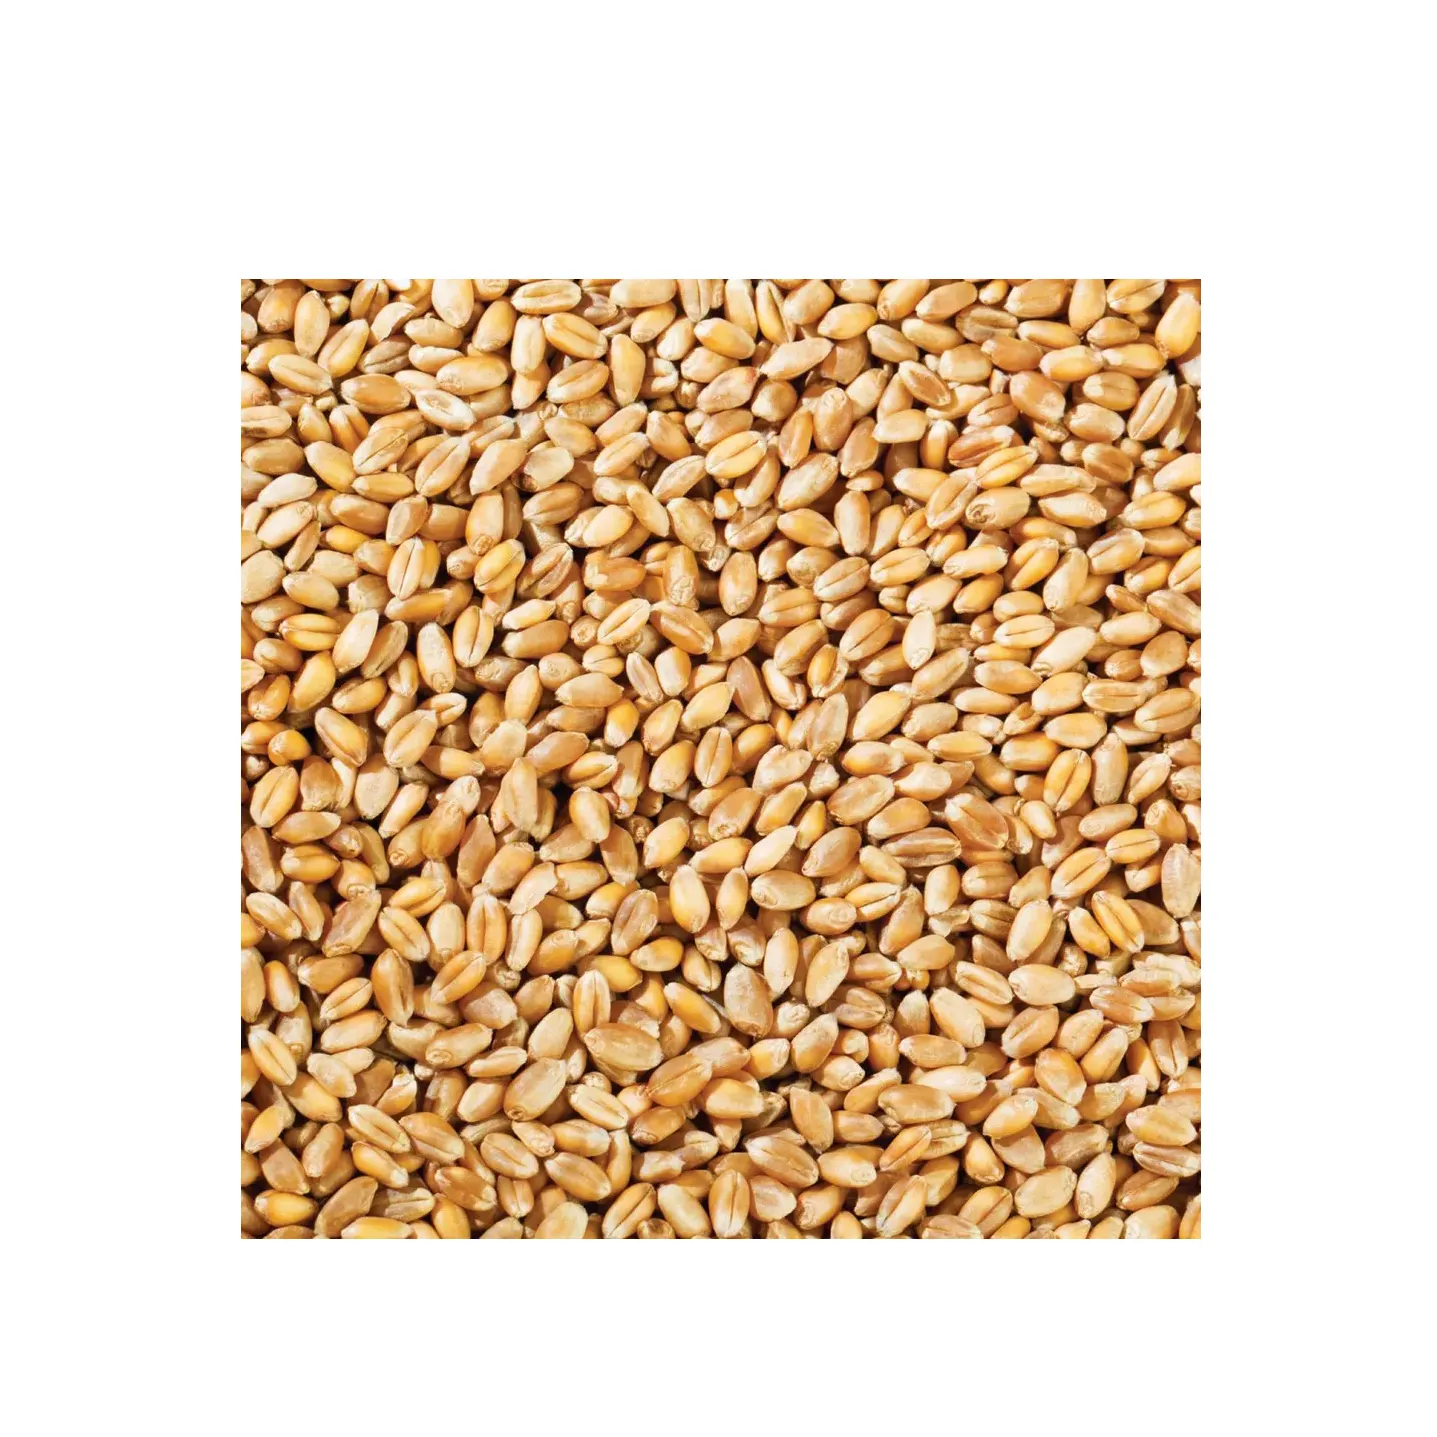 Wholesale Supplier Organic Whole Wheat Grain For Sale In Cheap Price